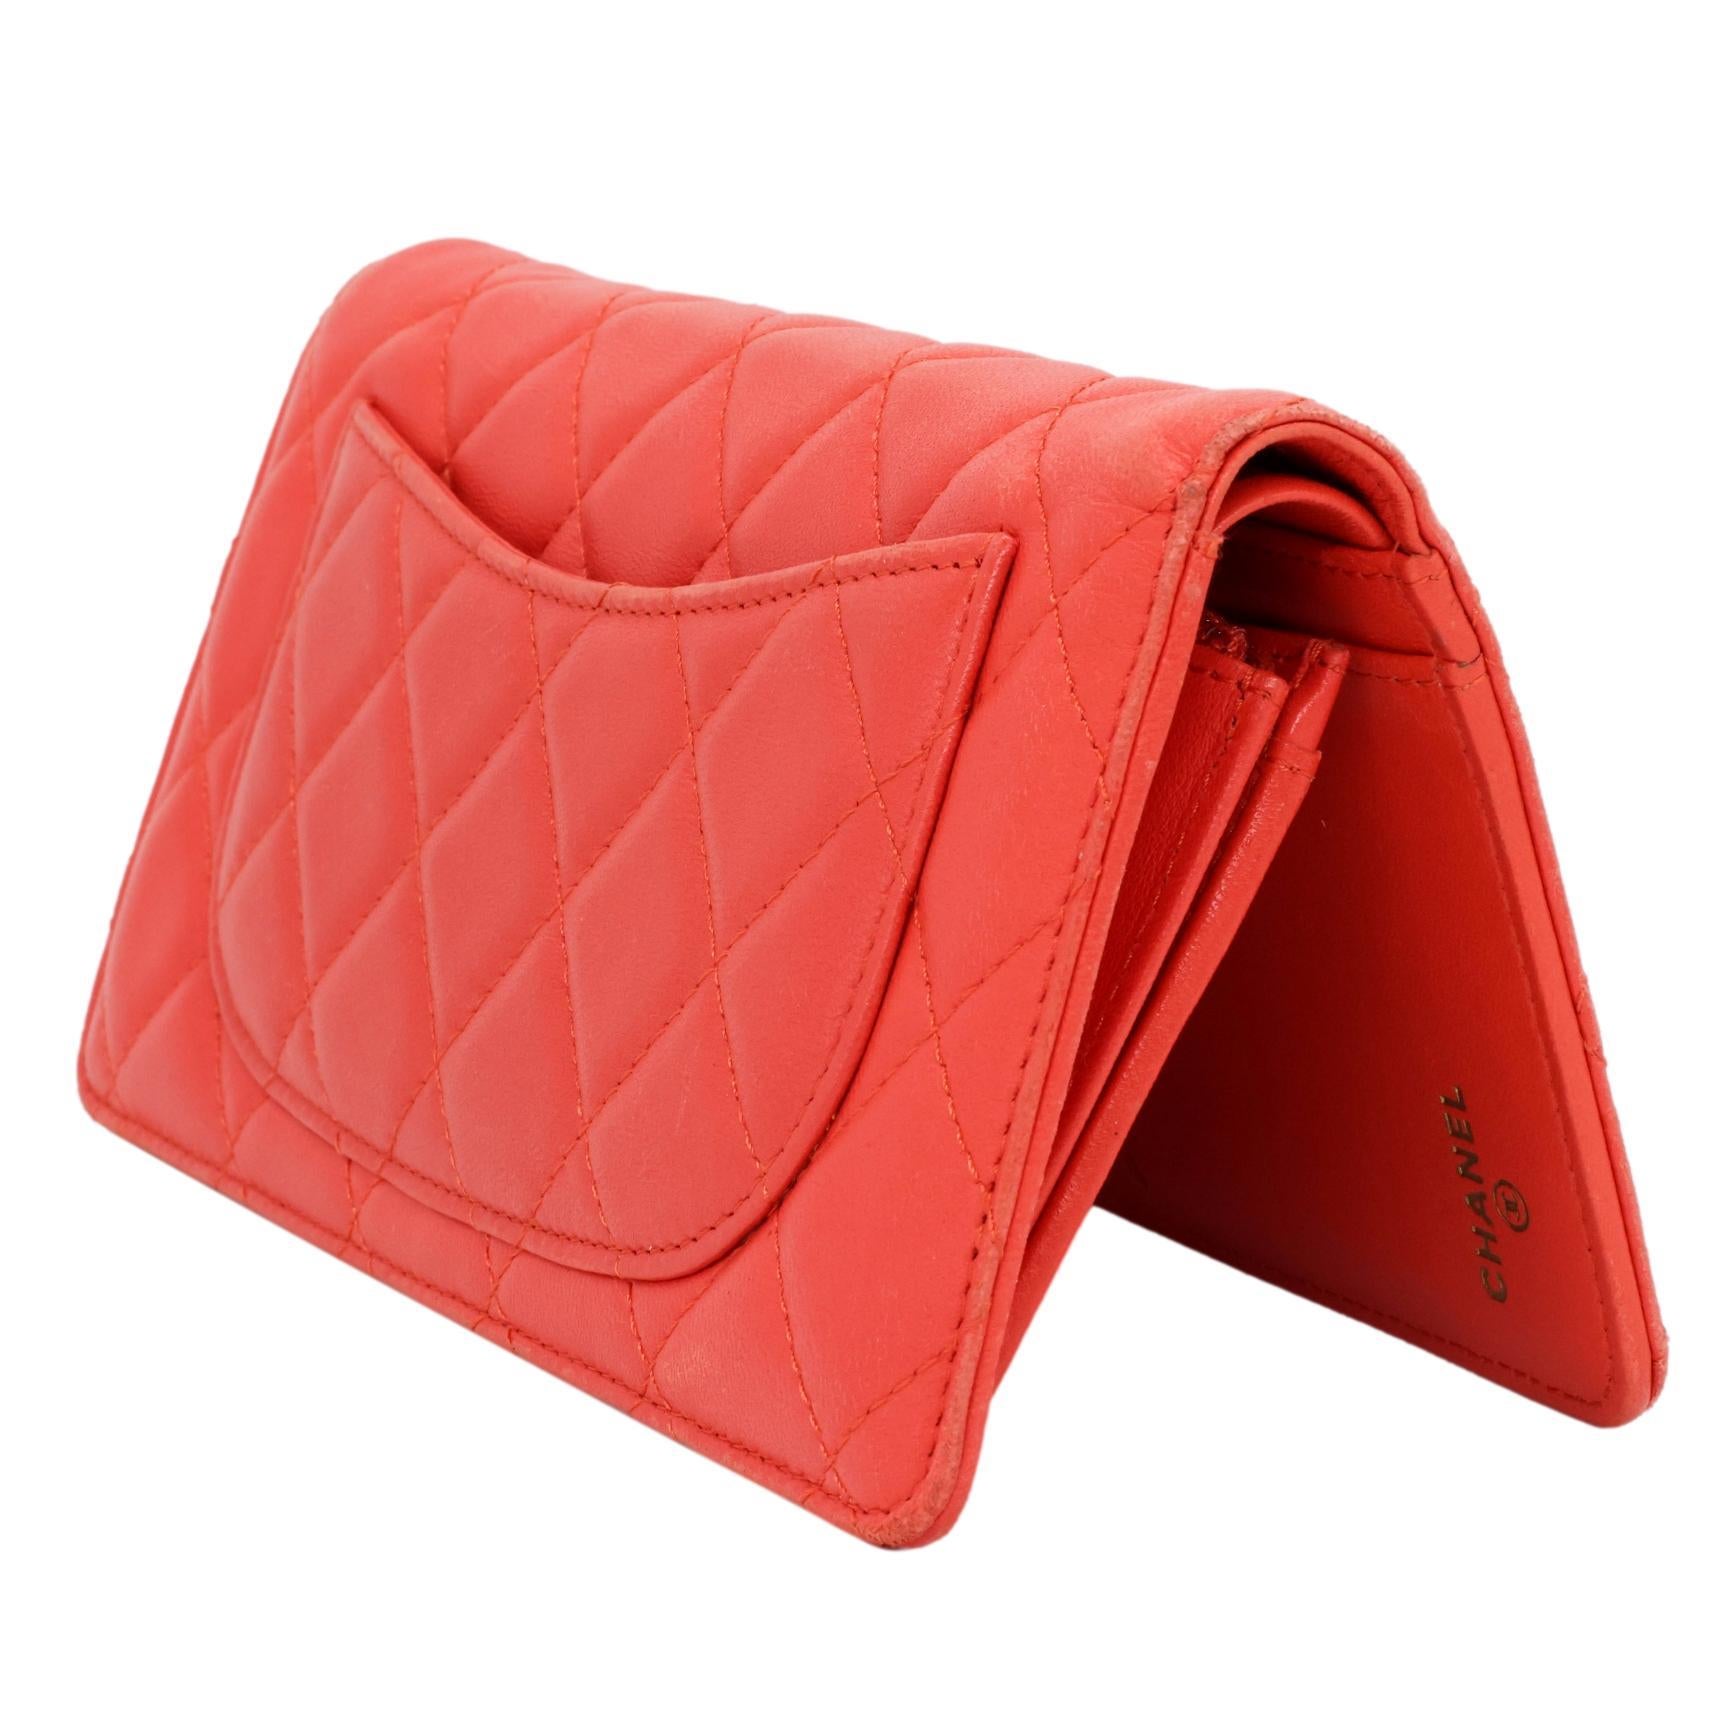 Chanel Quilted Coral Lambskin Leather Yen Continental Wallet, 2009 - 2010. 1